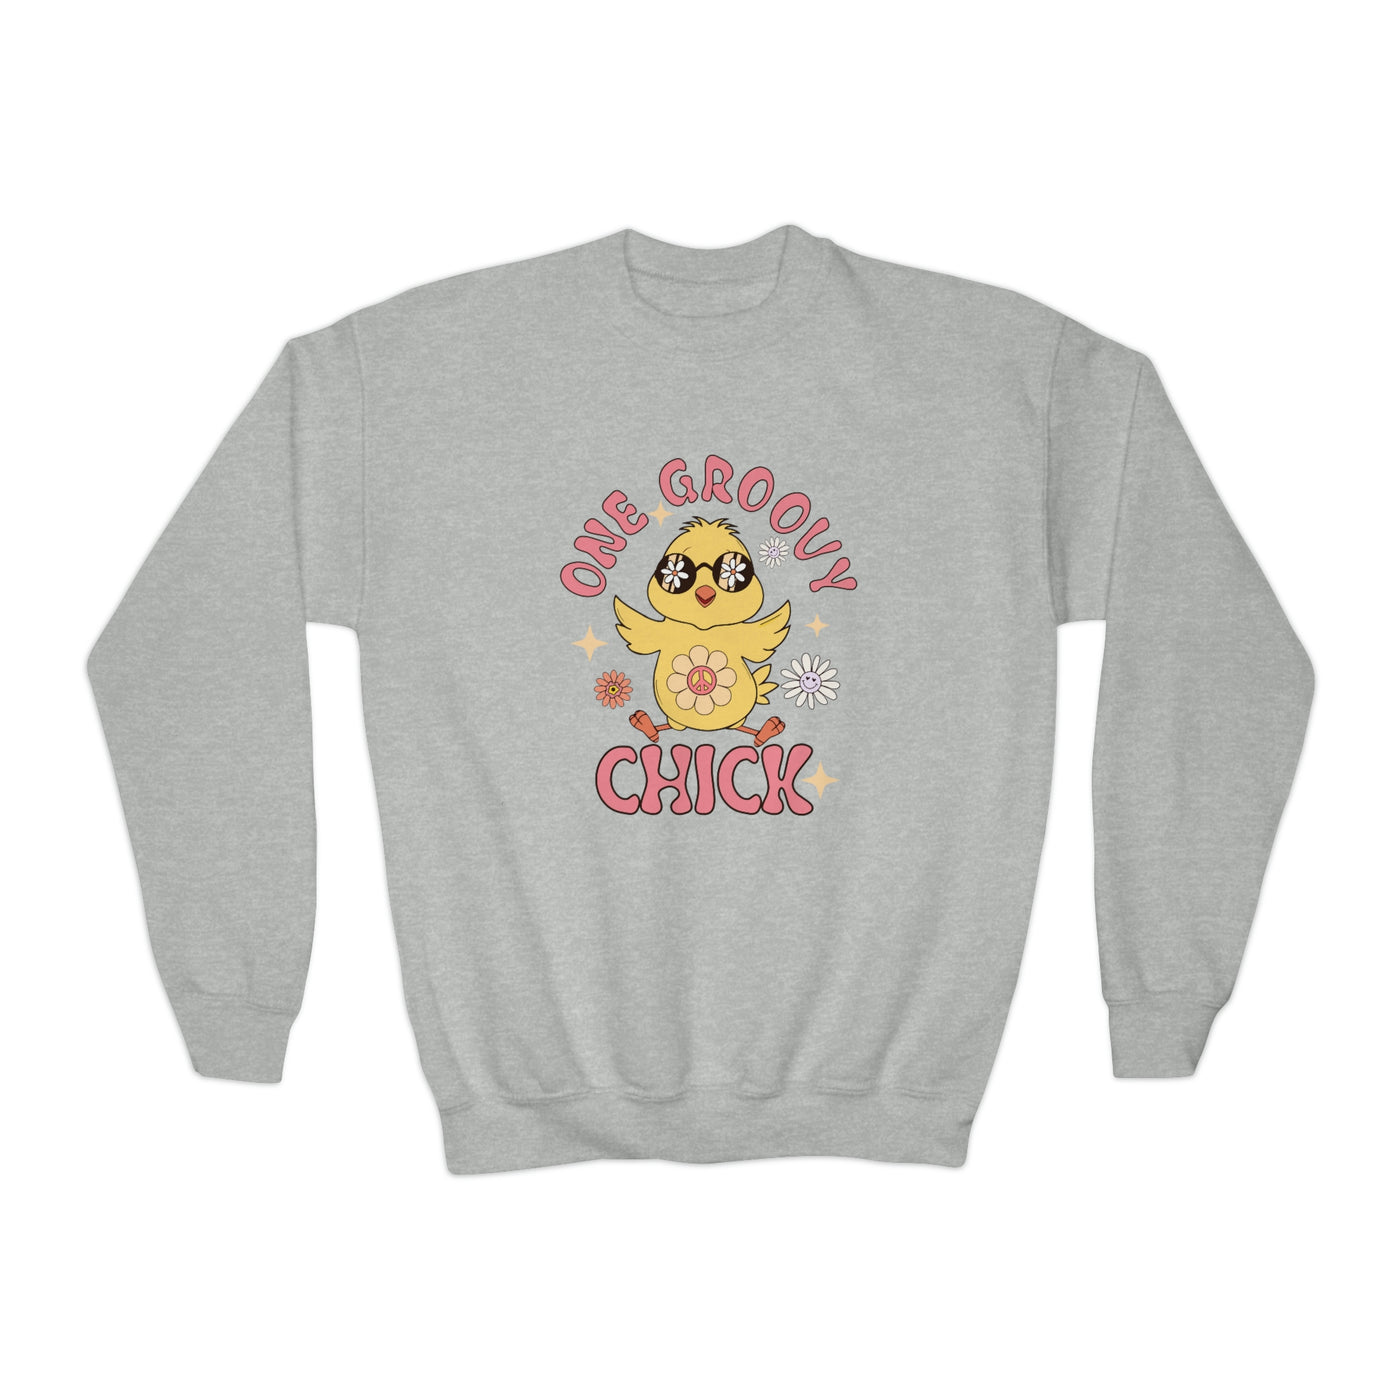 One Groovy Chick Youth Crewneck